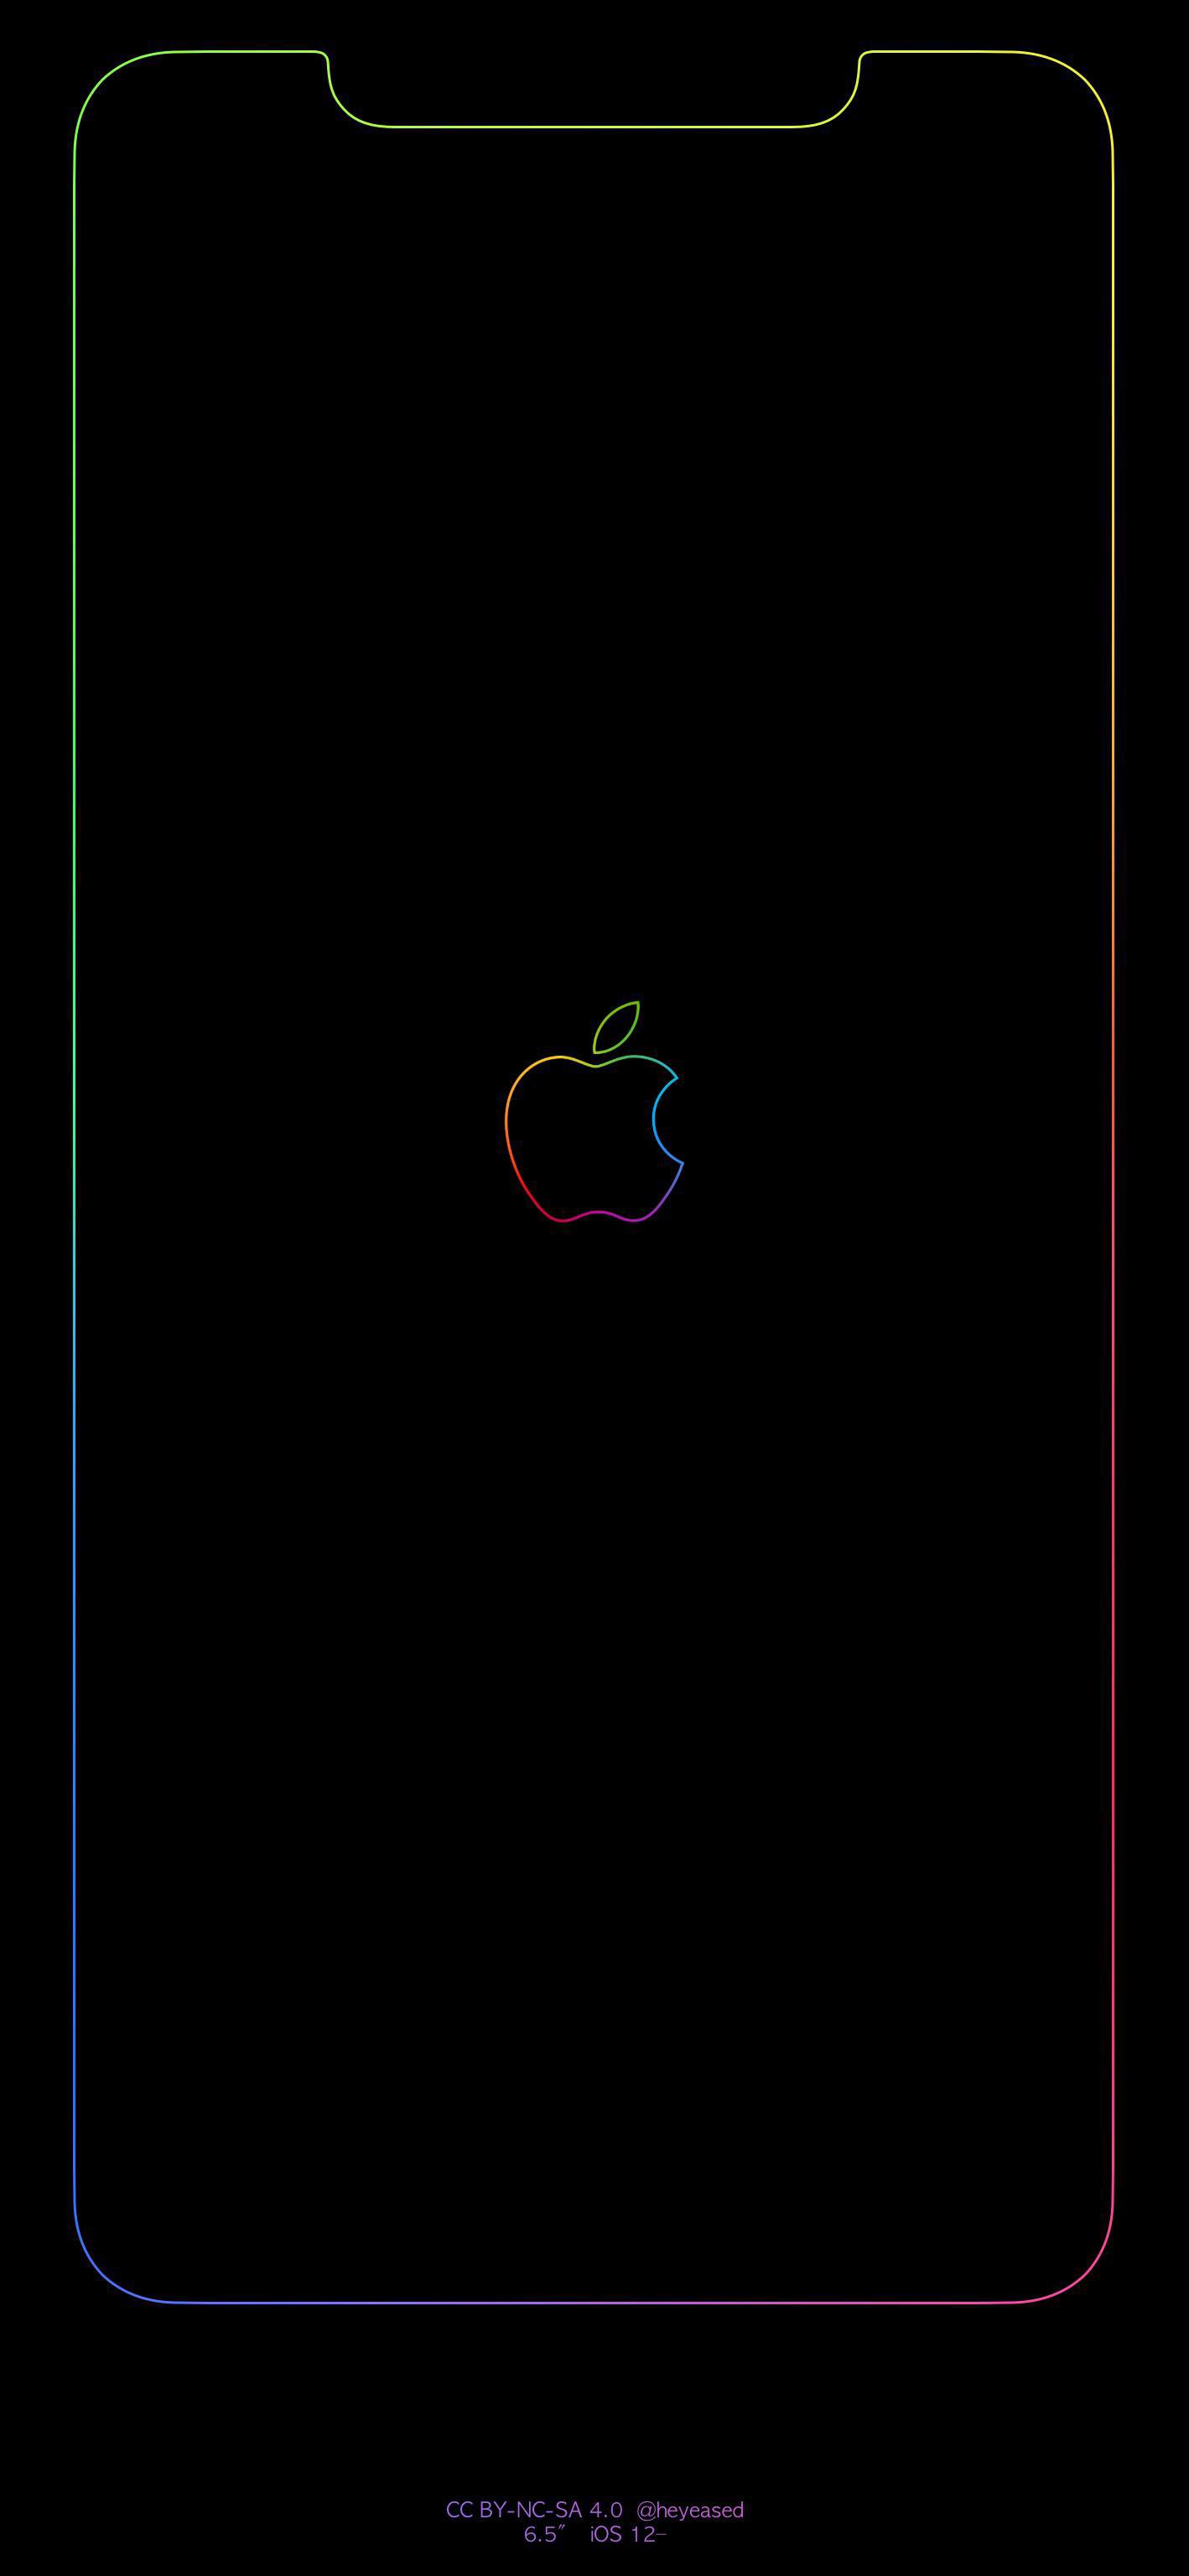 Does anyone have a version of this wallpaper for the iPhone 12?